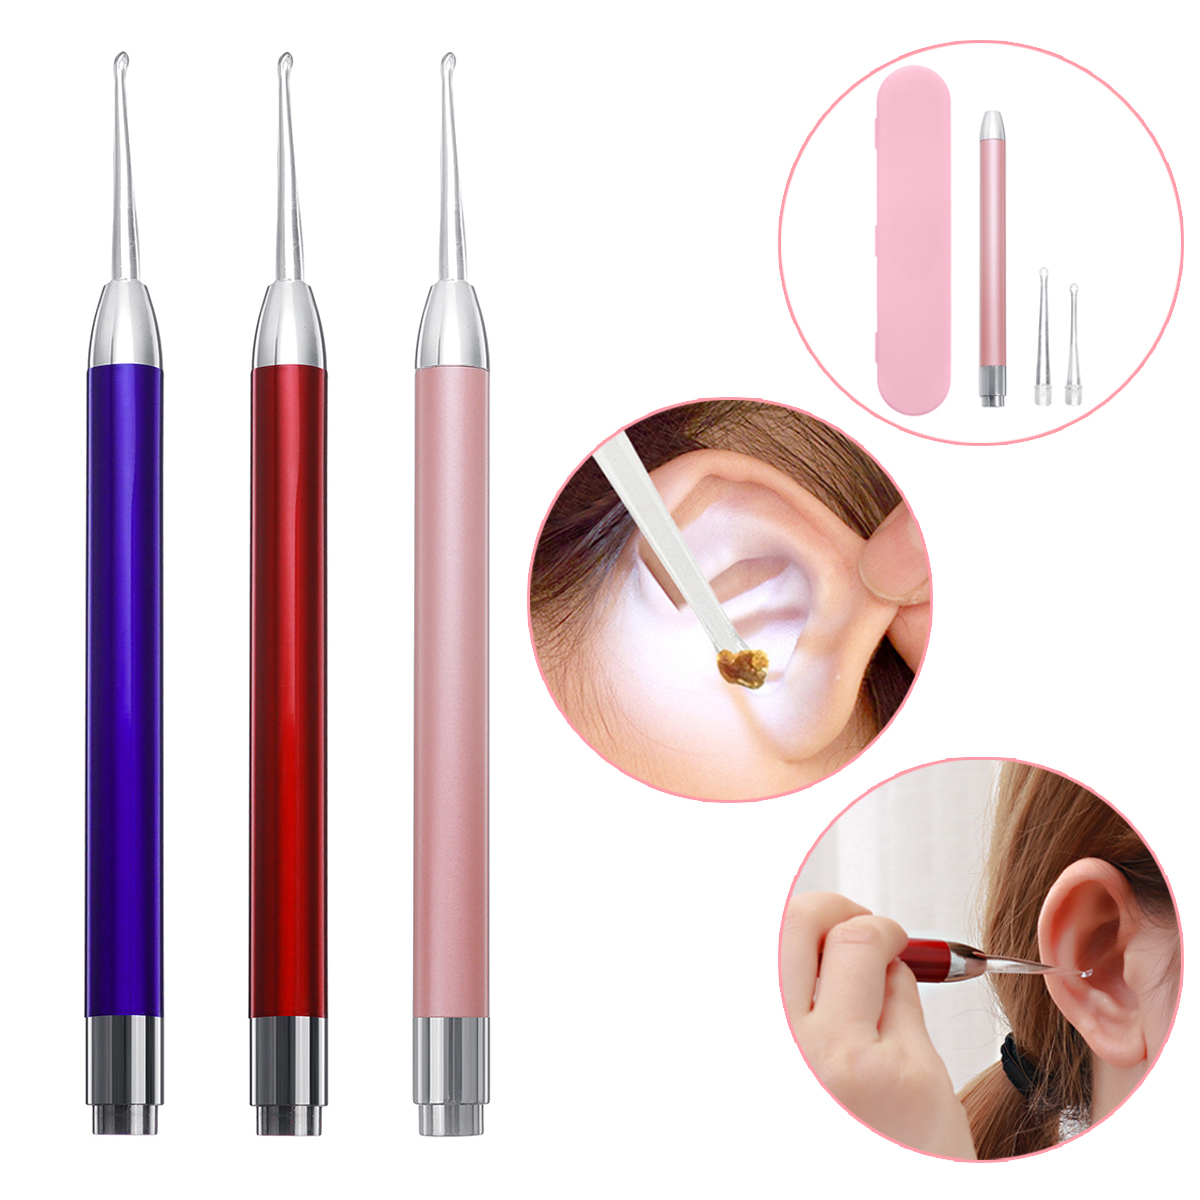 LED-Flashlight-Earpick-Ear-Wax-Remover-Ear-Cleaning-Tool-for-Children-and-Adult-Ear-Care-Set-1782776-3